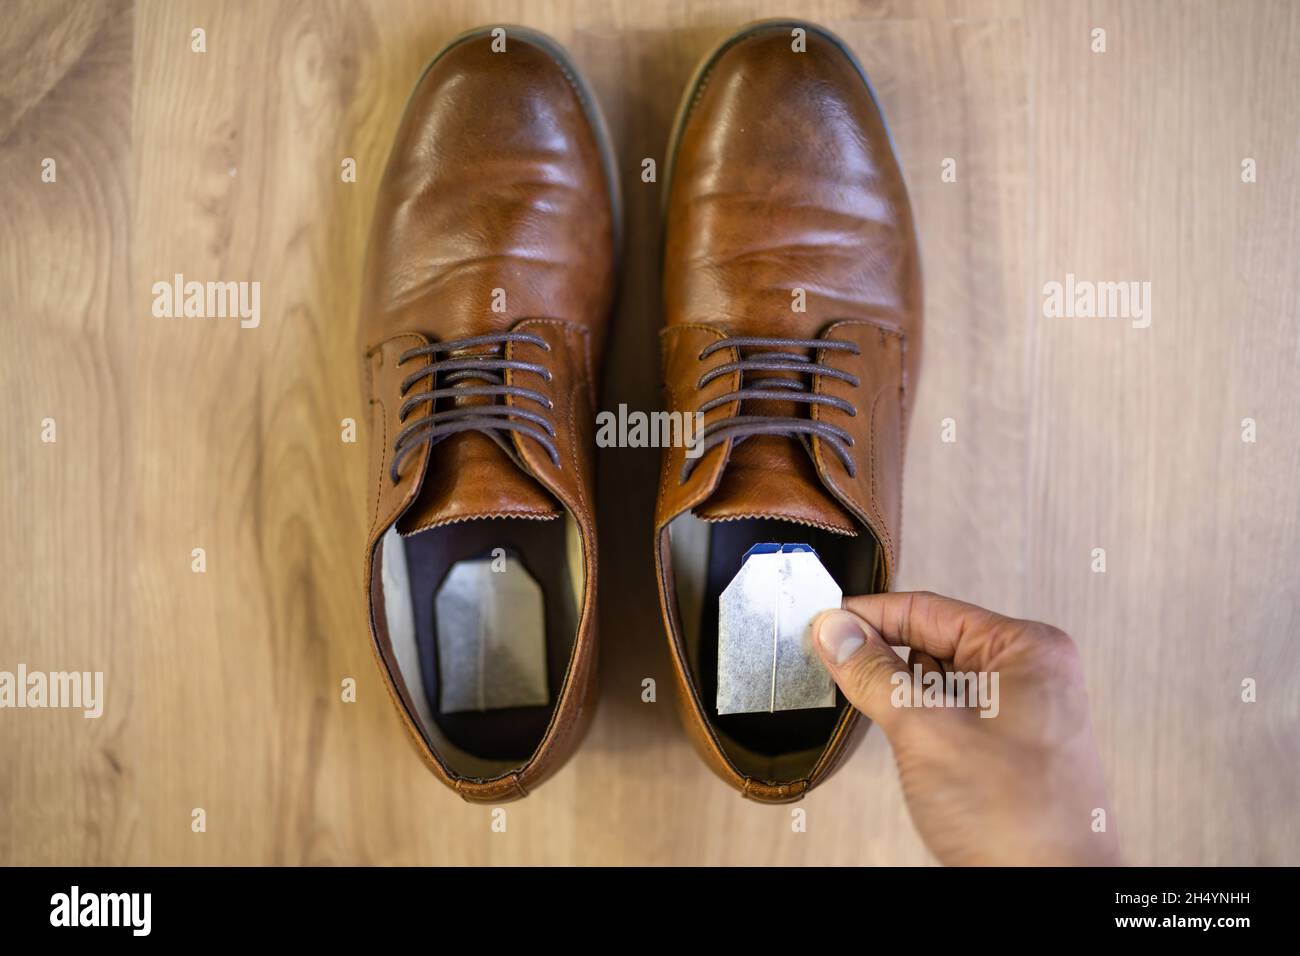 Tea Bag Aroma Life Hack For Smelly Shoes And Foot Odor Stock Photo